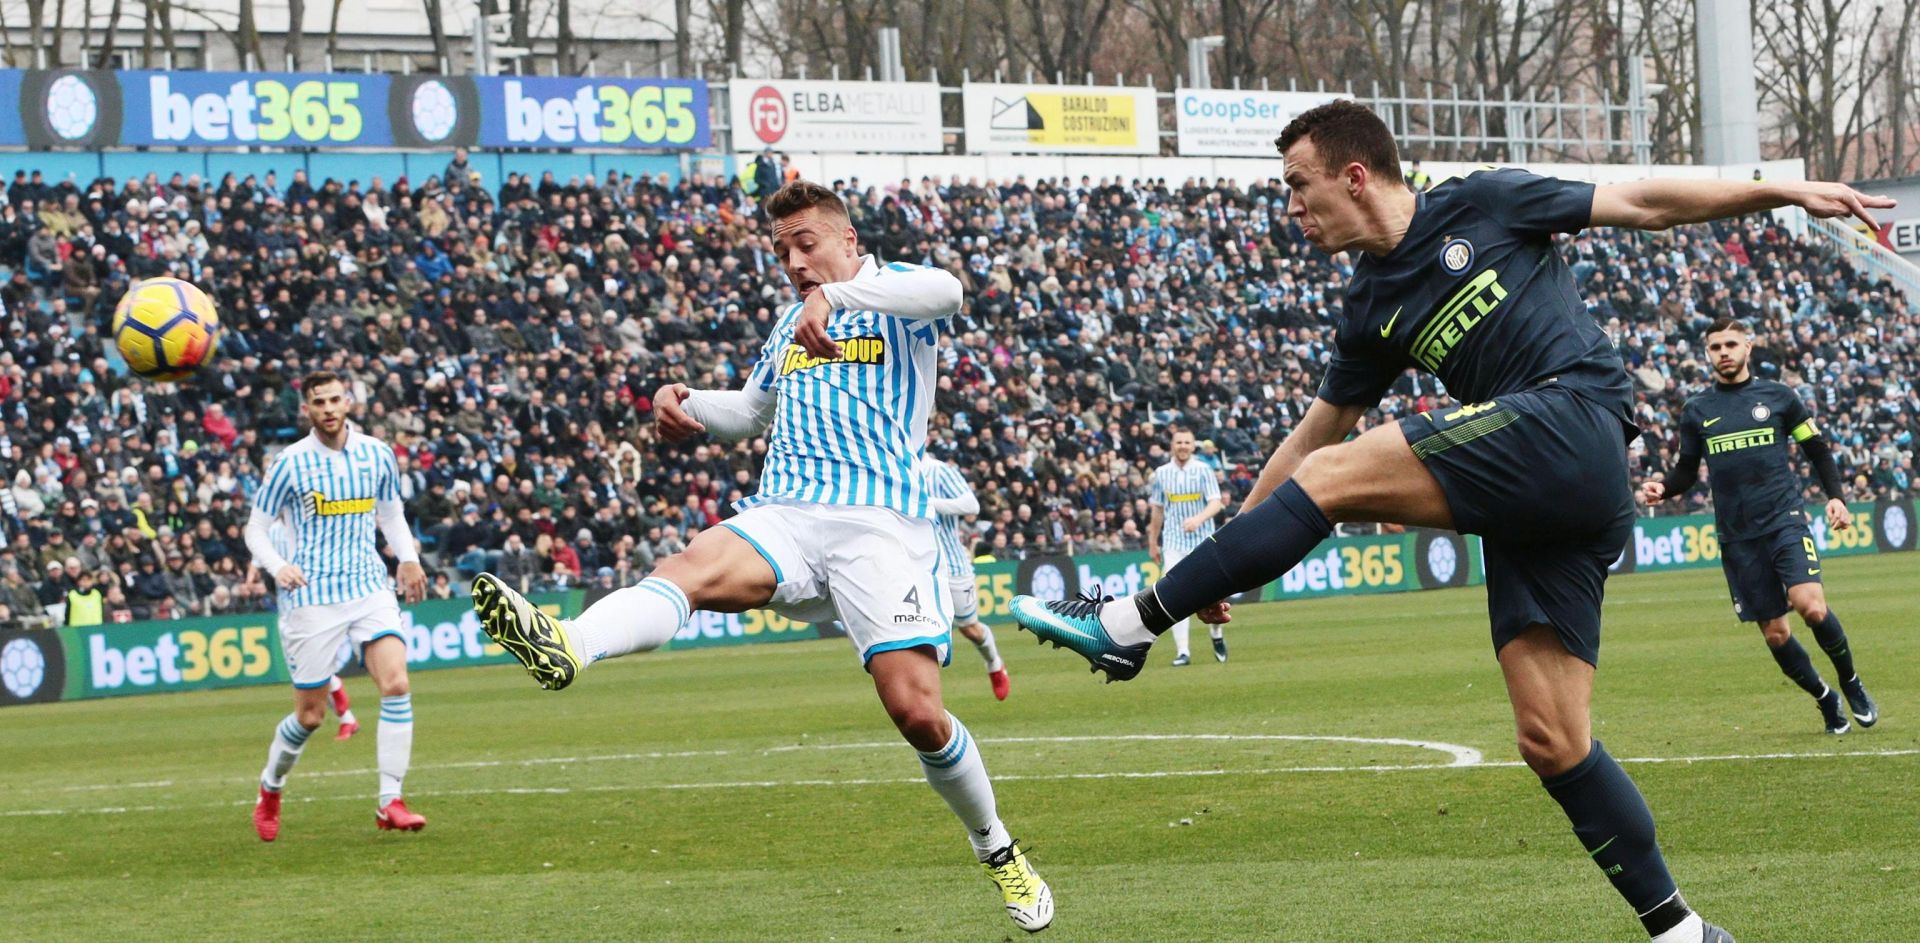 epa06481144 Spal's Thiago Cionek (L) and Inter's Ivan Perisic (R) in action during the Italian Serie A soccer match between Spal 2013 and Inter FC at Paolo Mazza Stadium in Ferrara, Italy, 28 January 2018.  EPA/SERENA CAMPANINI